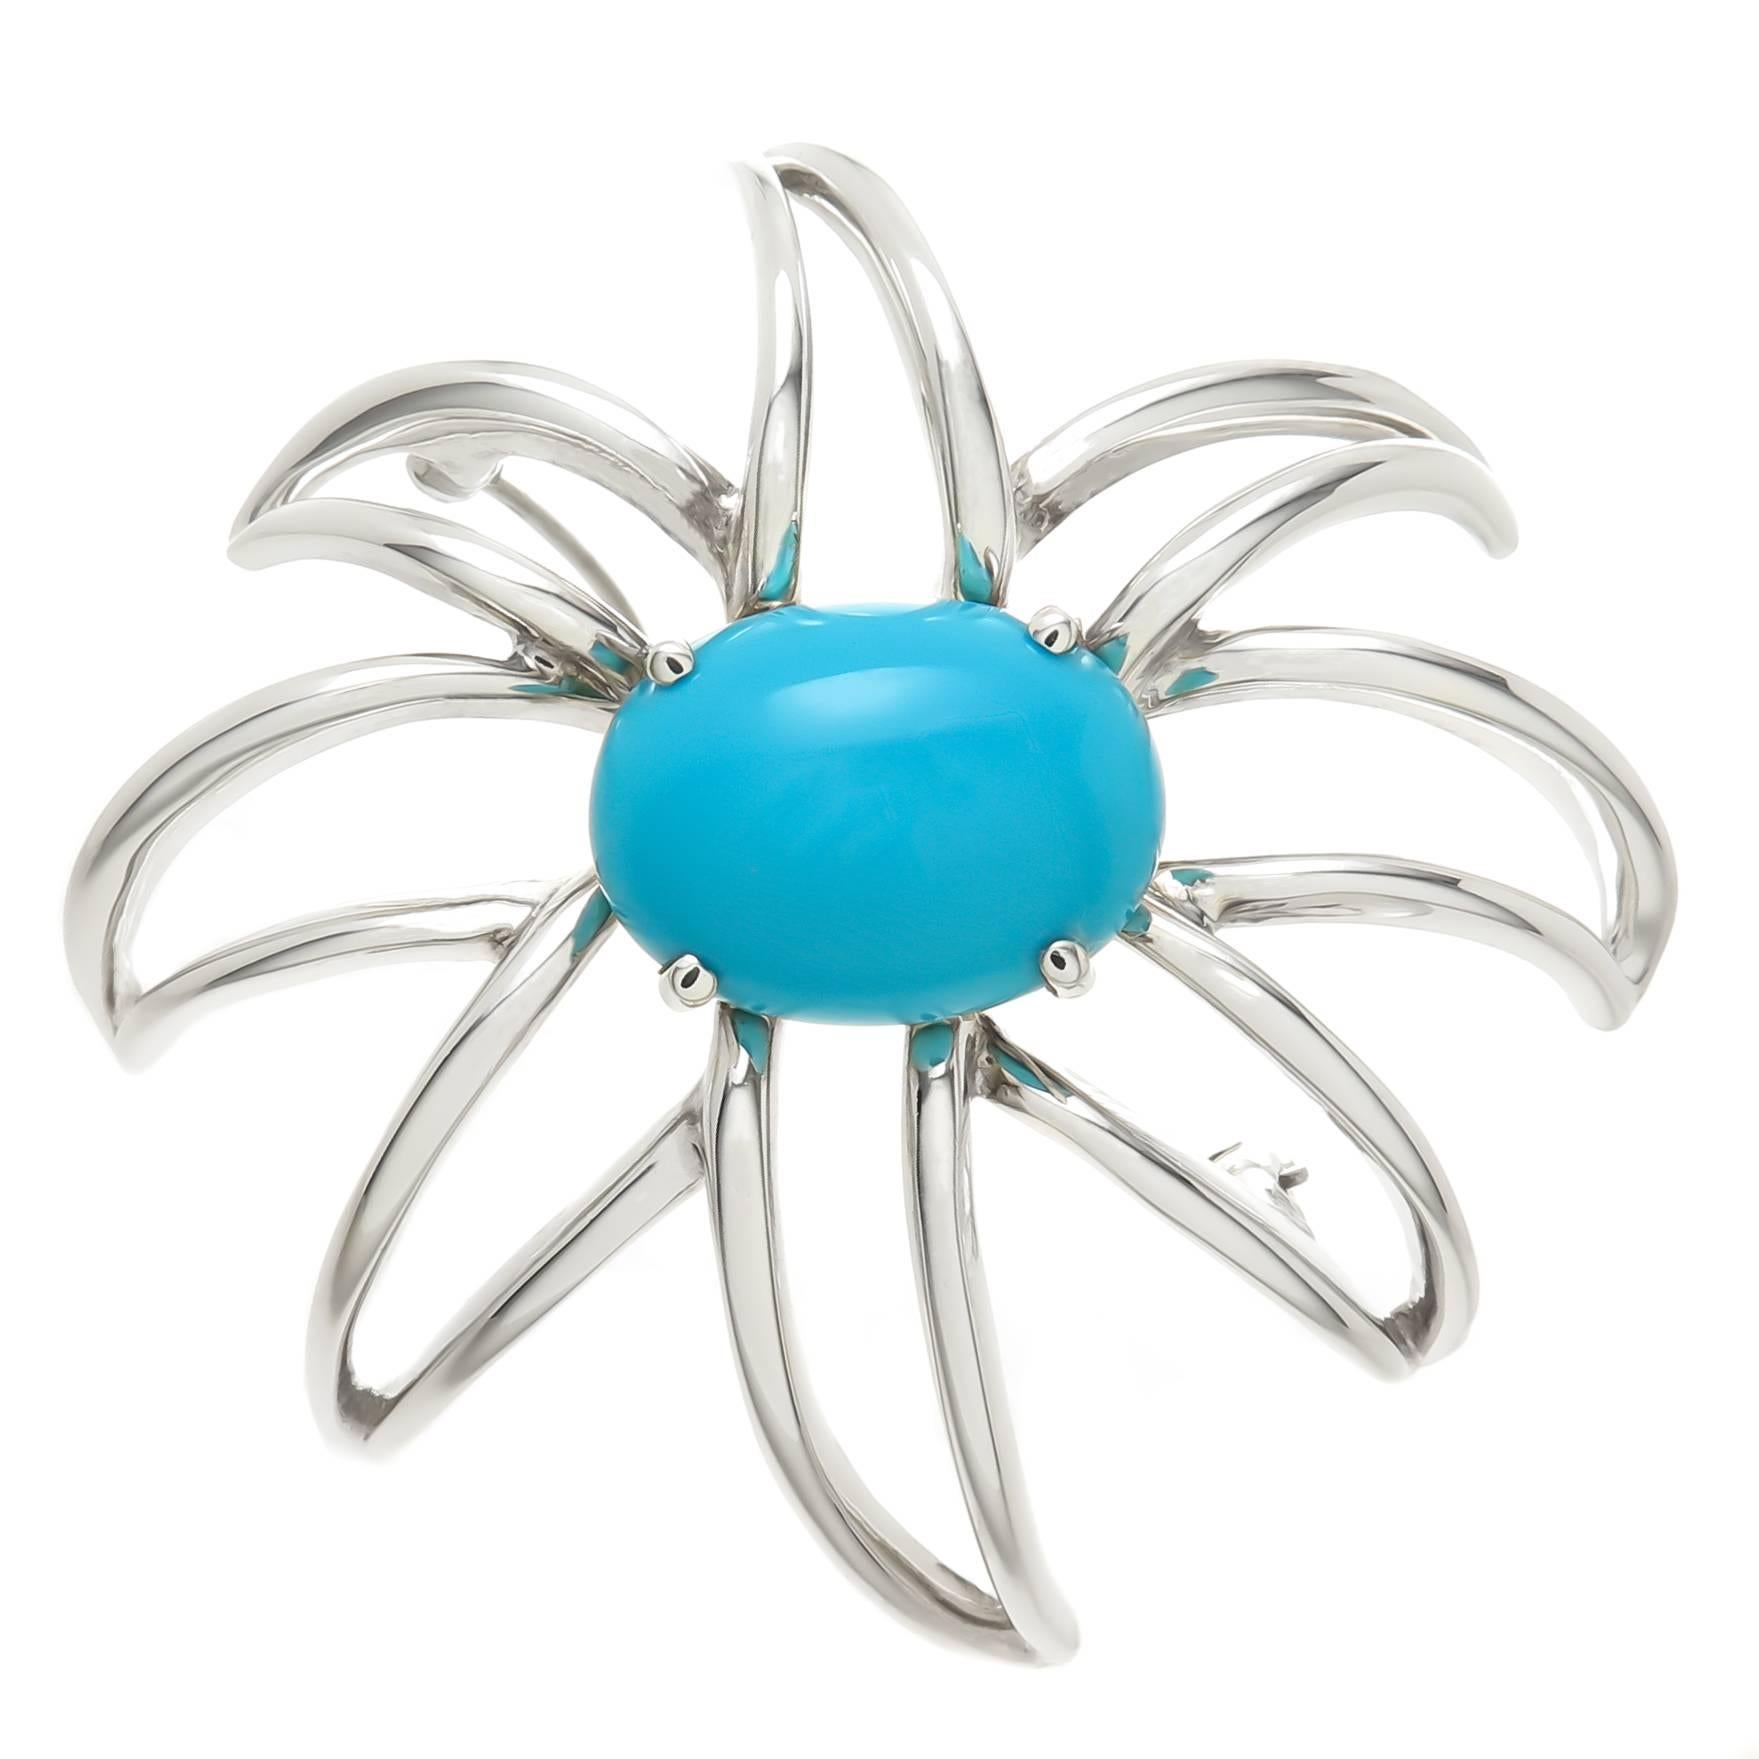 Tiffany & Co. Silver and Turquoise Large Fireworks Brooch